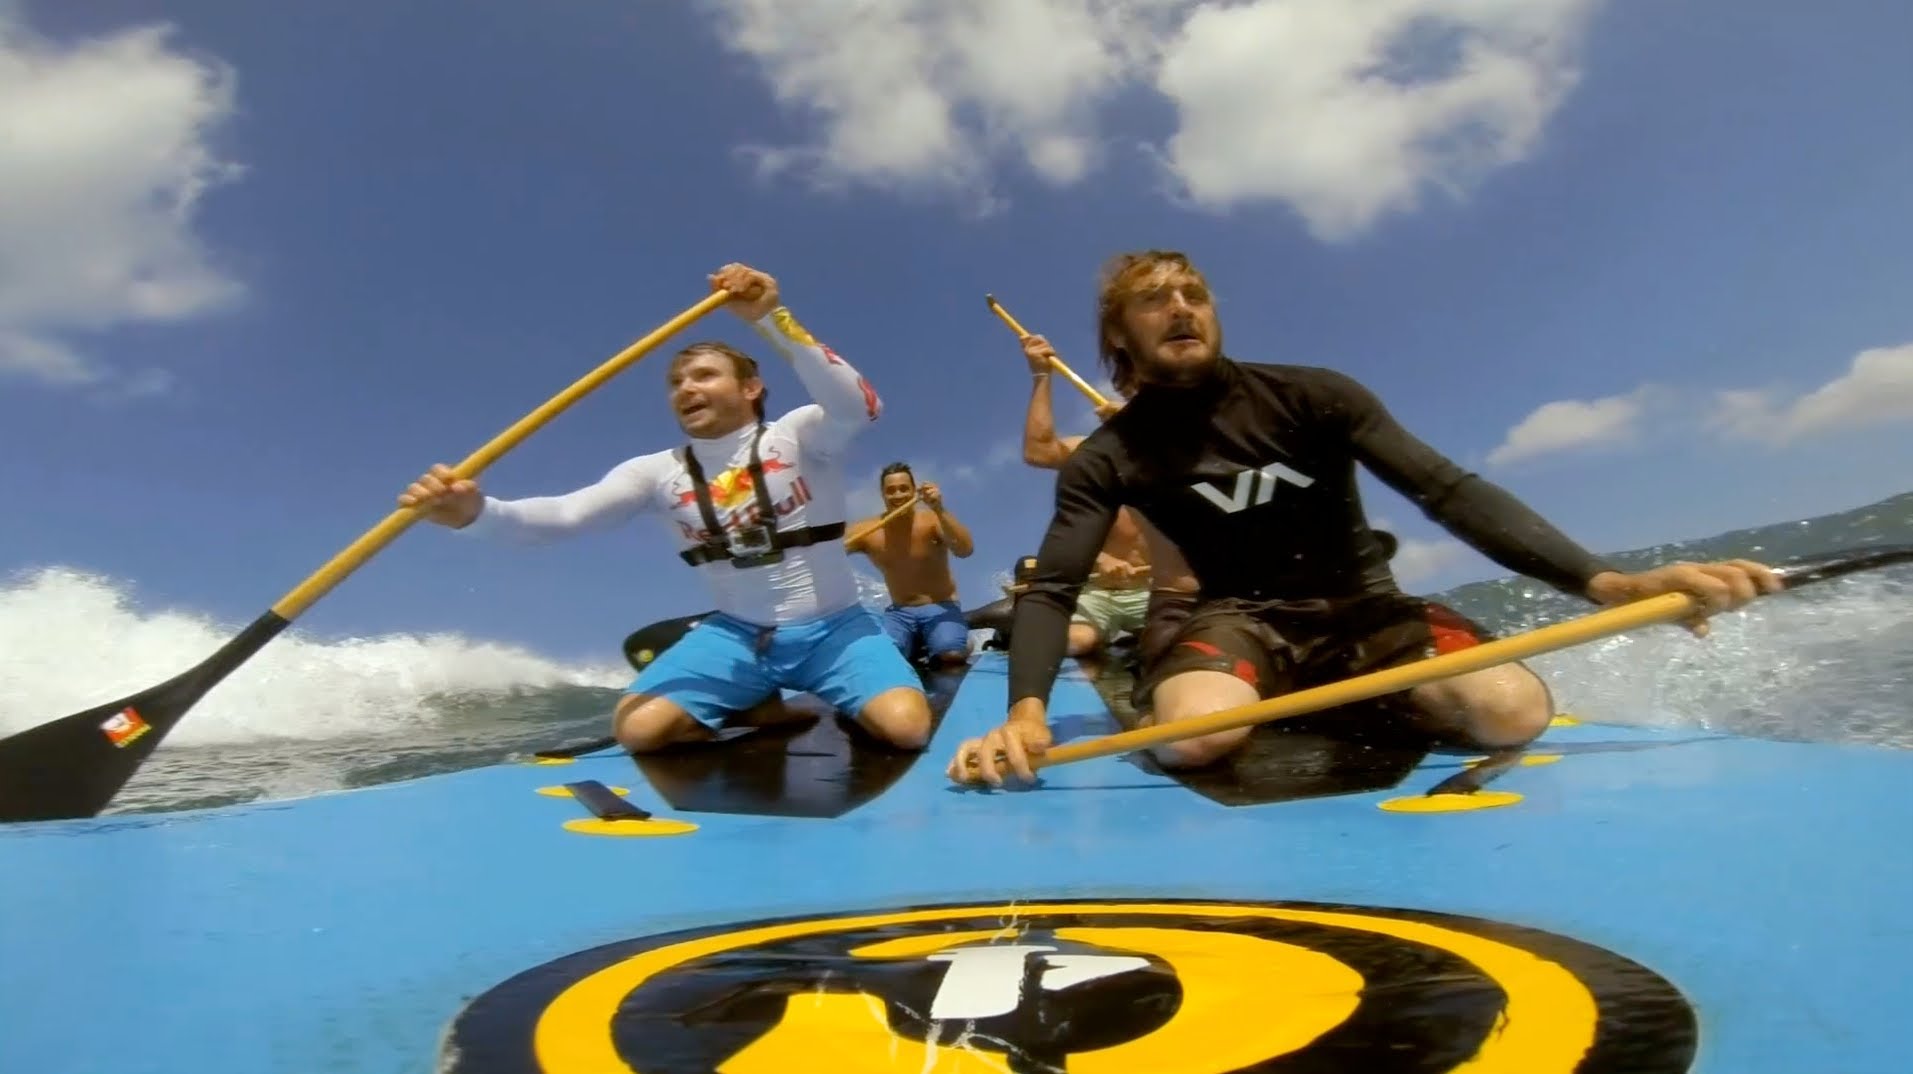 Jamie Sterling and Friends: SUP-Squatch Attacks!